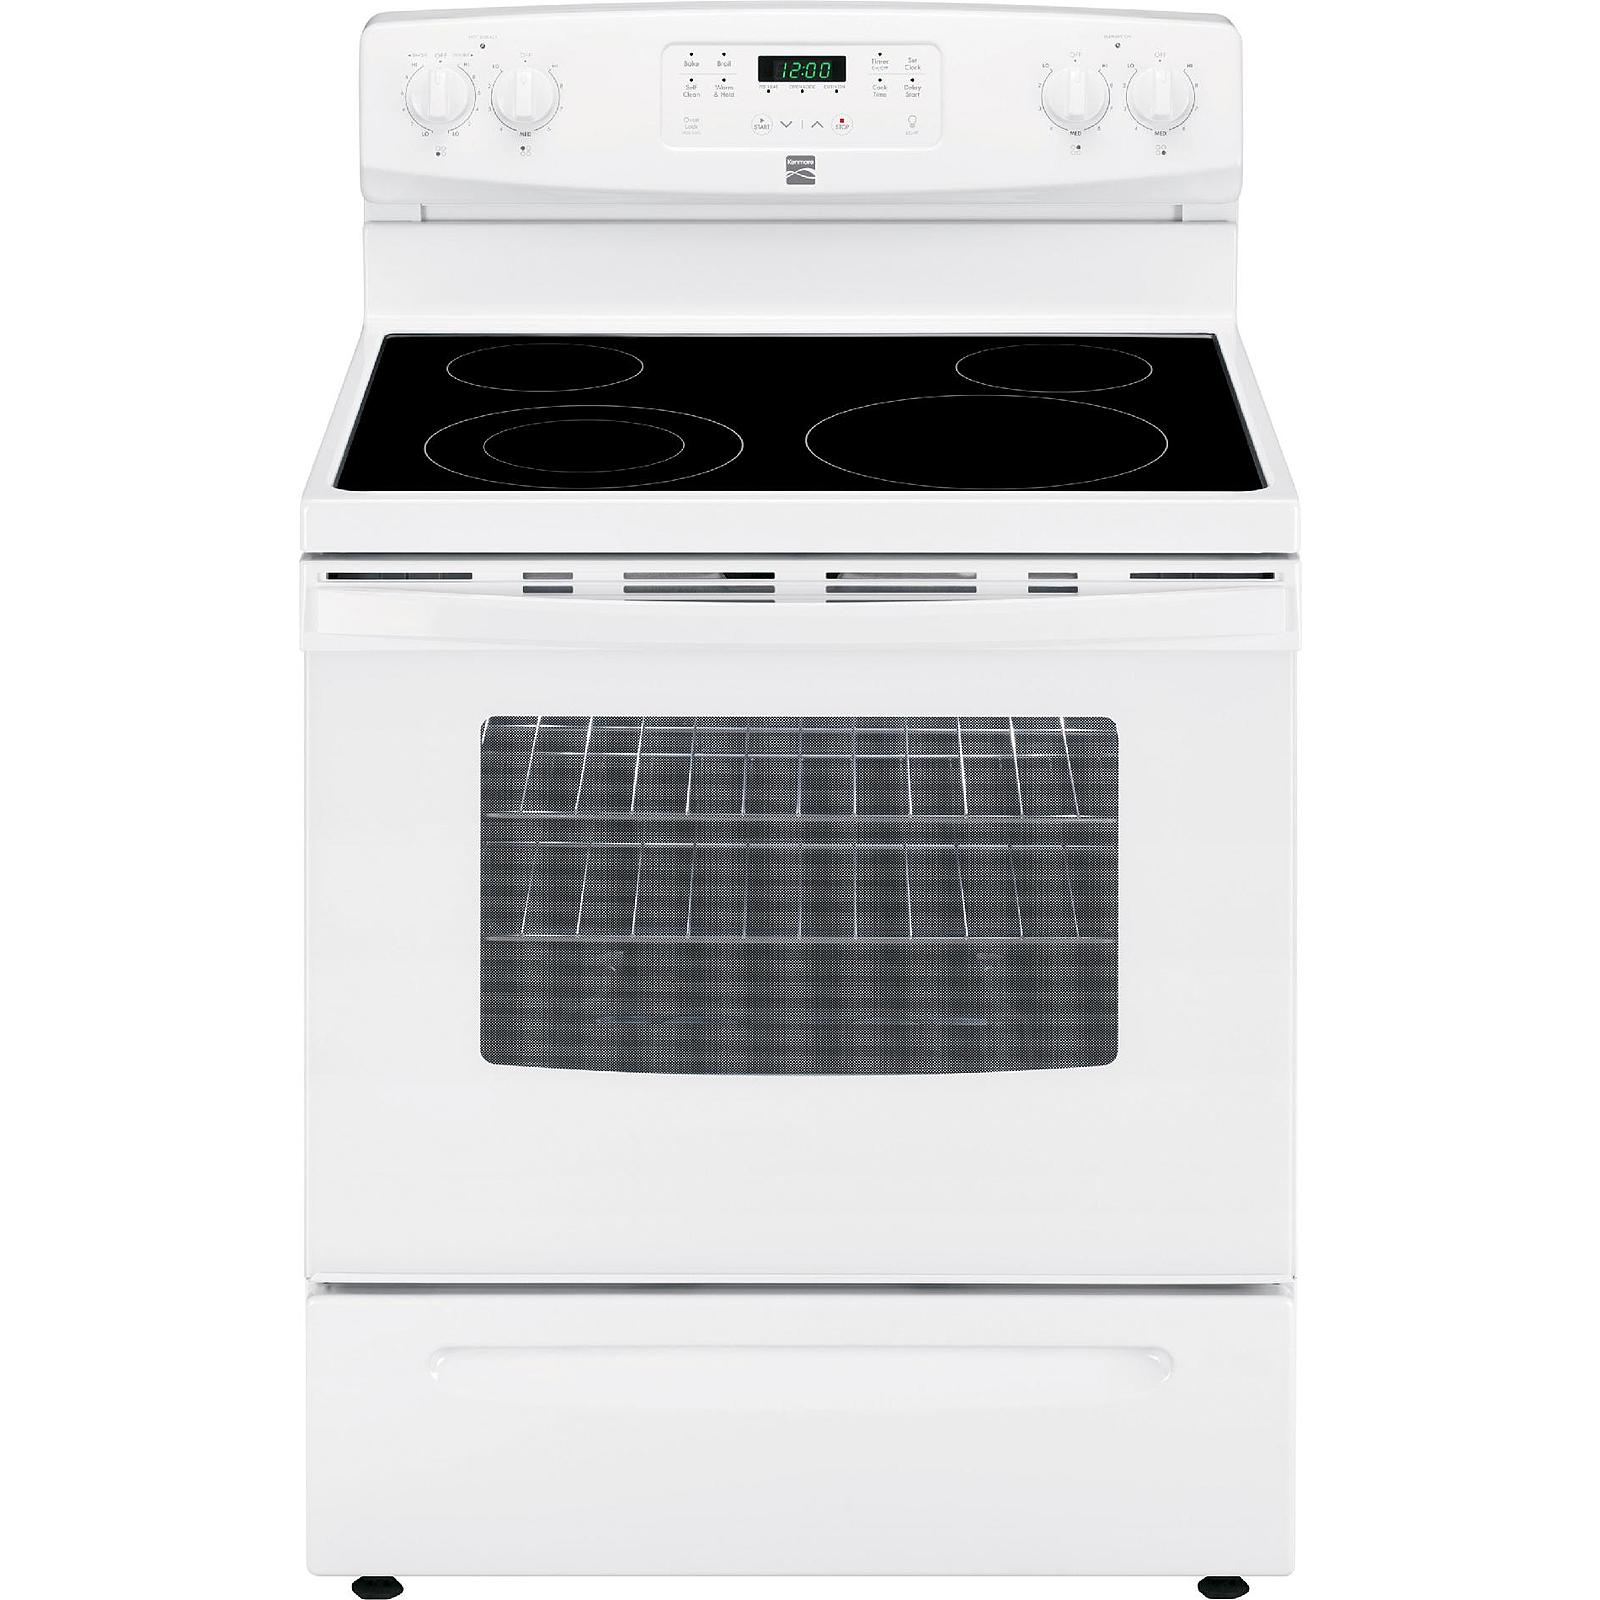 0012505508172 - 94172 5.3 CU. FT. SELF-CLEANING ELECTRIC RANGE - WHITE